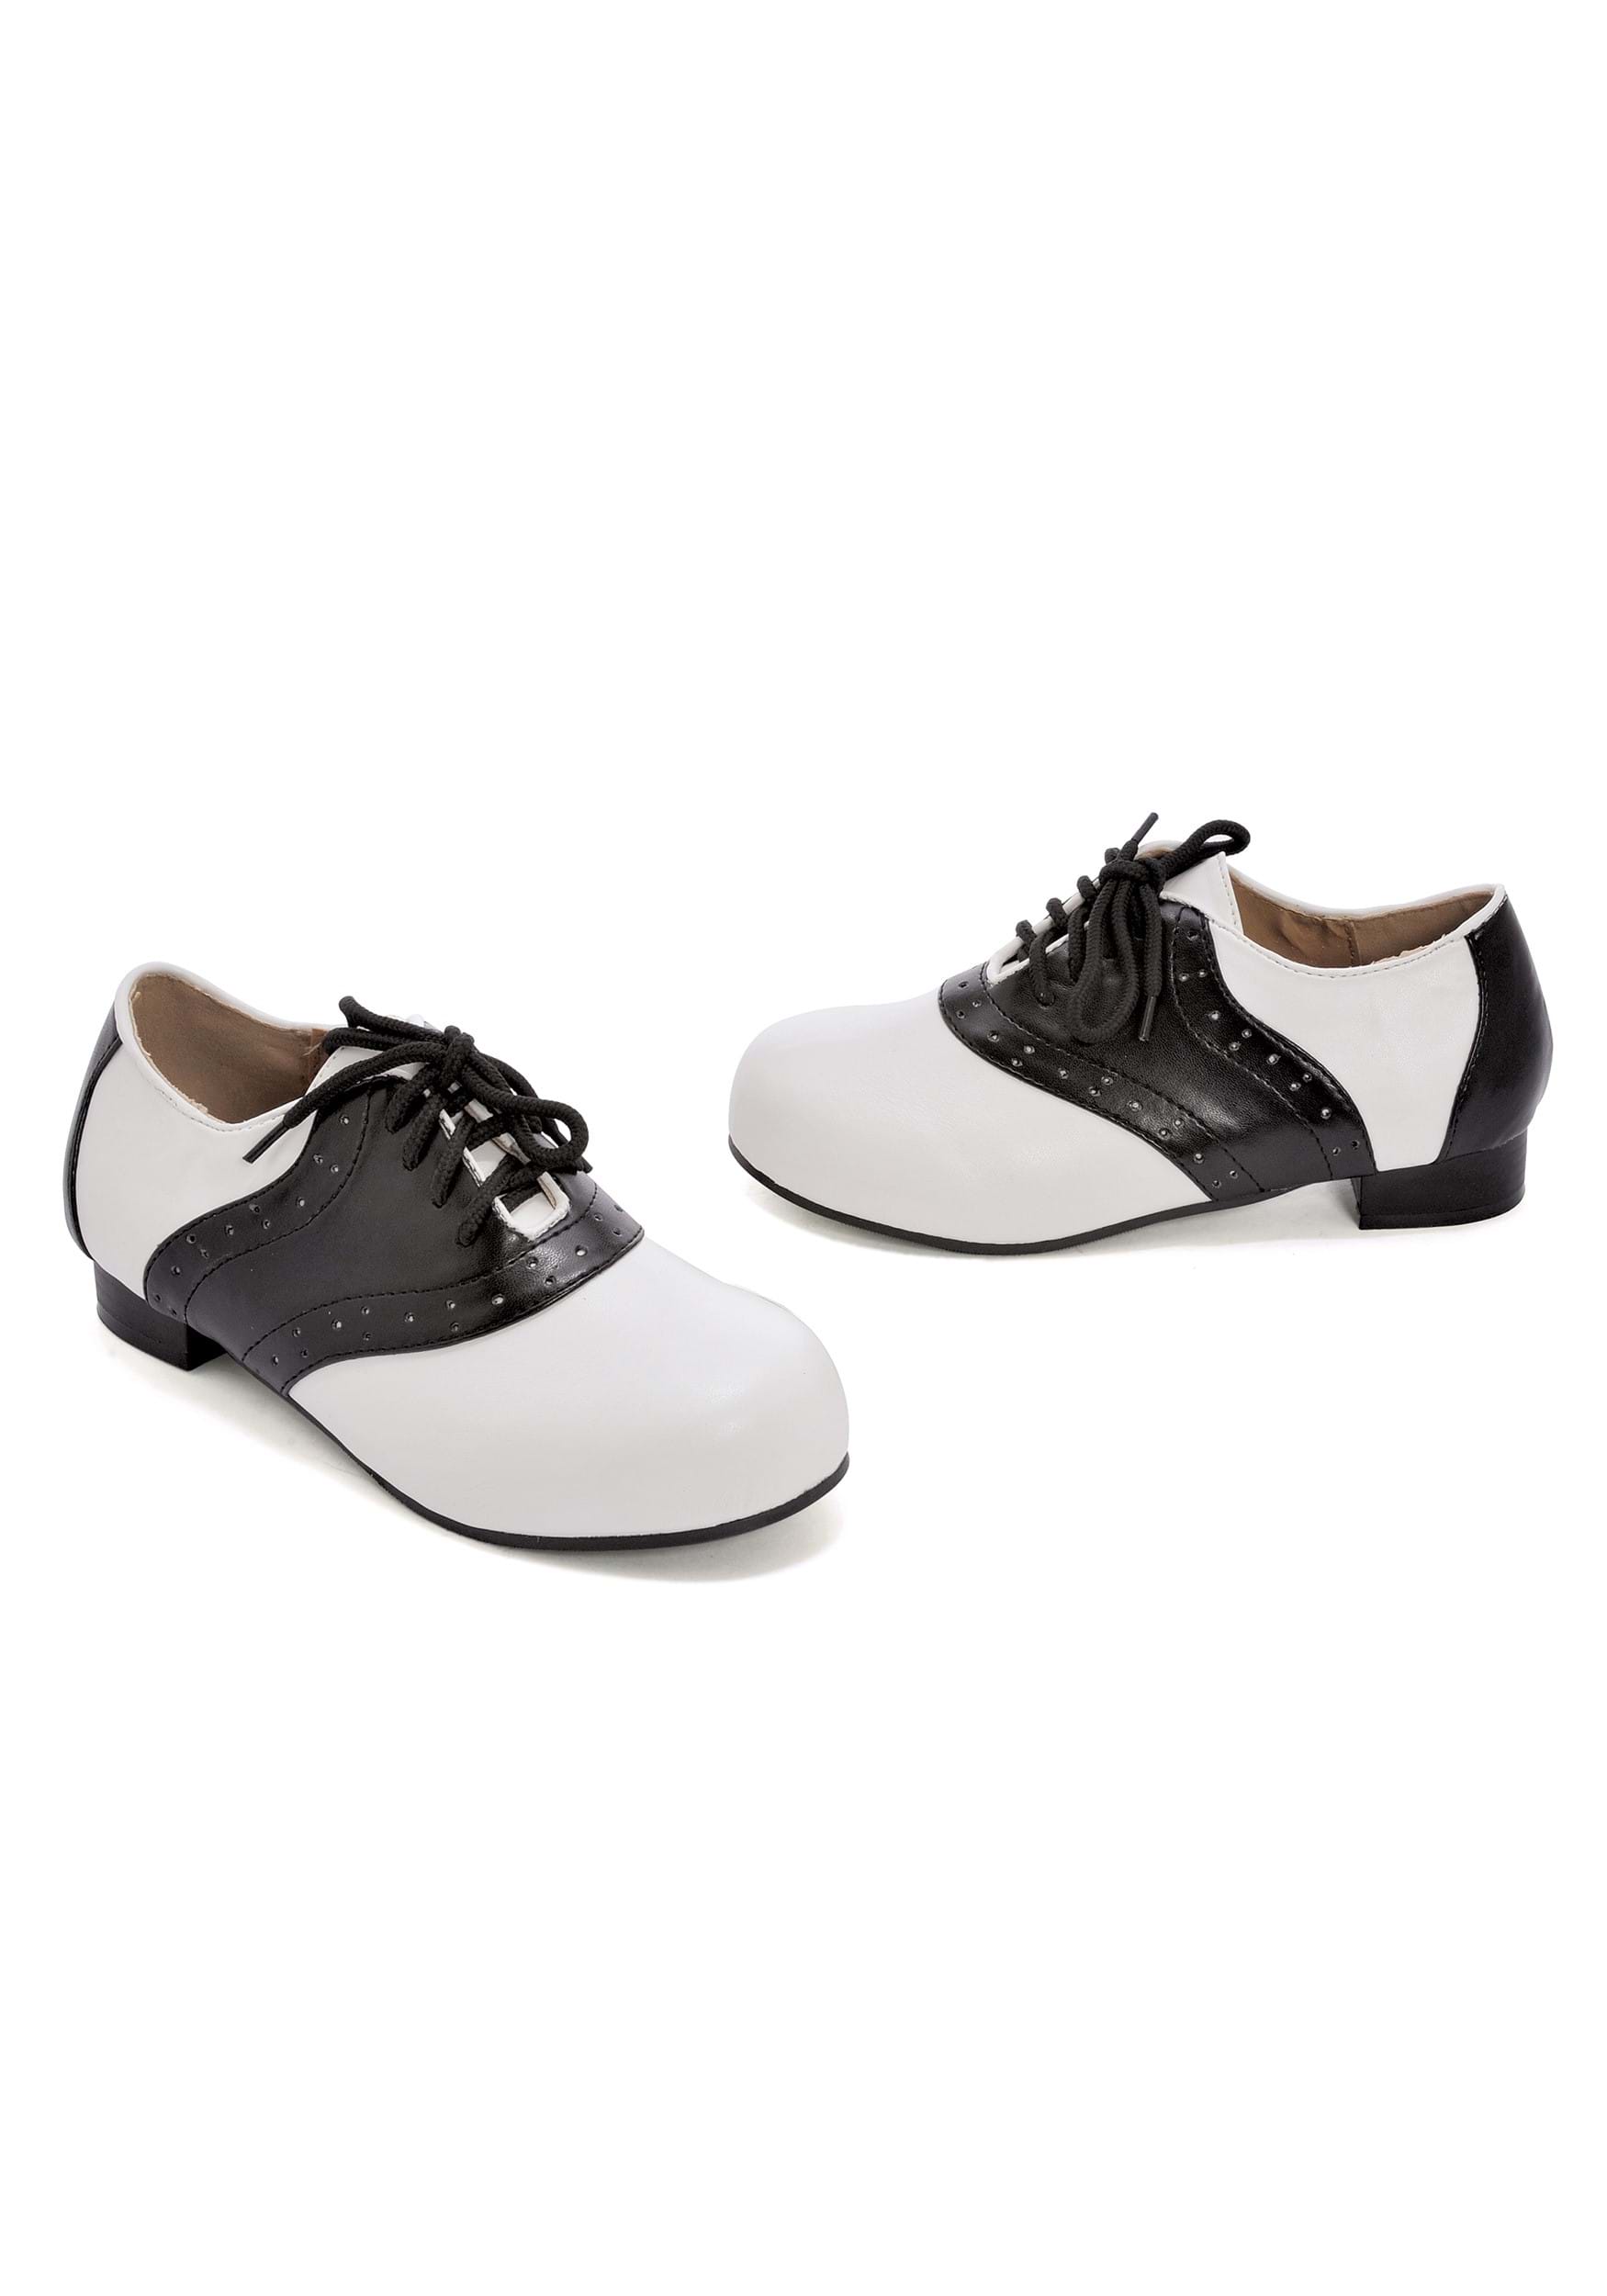 Black And White Saddle Girl's Shoes , Girl's Costume Shoes